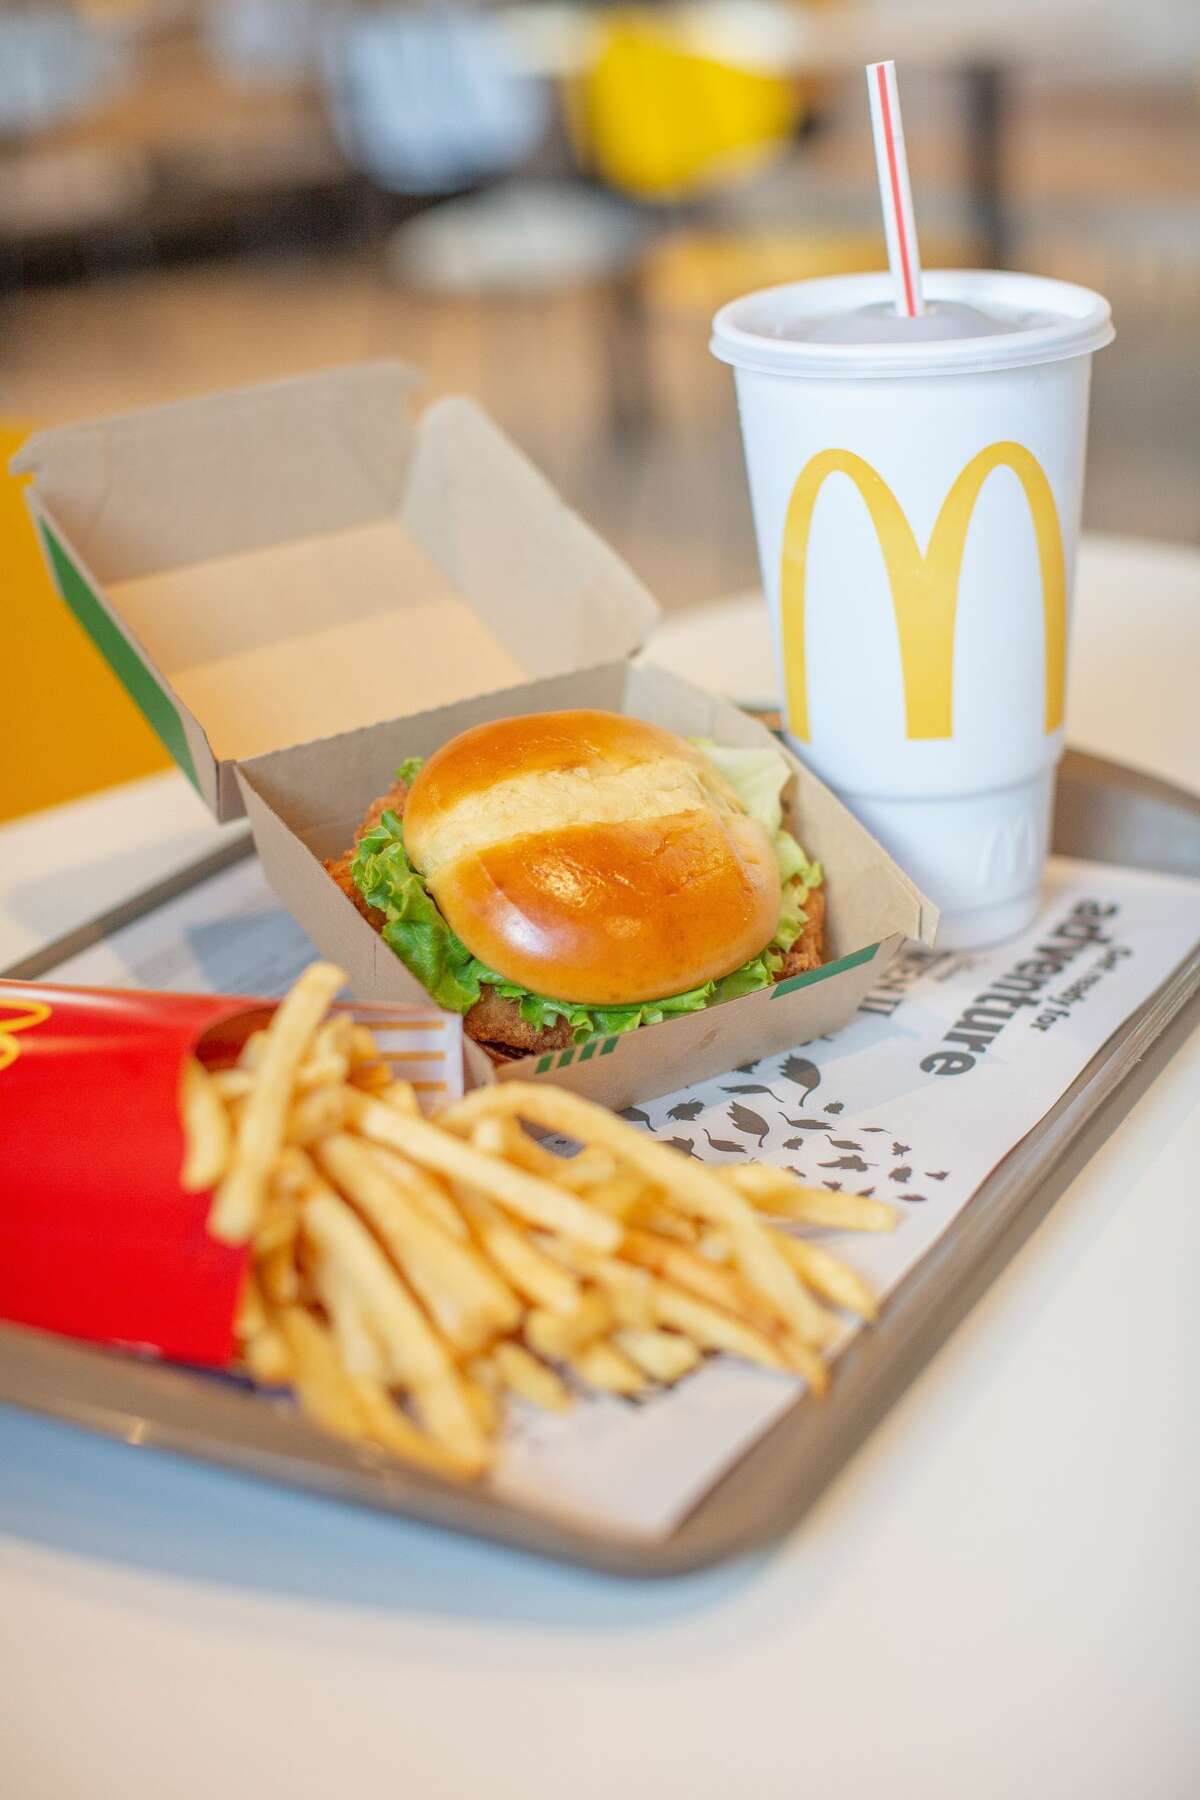 McDonald's Crispy Chicken Sandwich will be available in select Houston and Knoxville locations as the company tests the waters of the chicken sandwich market.